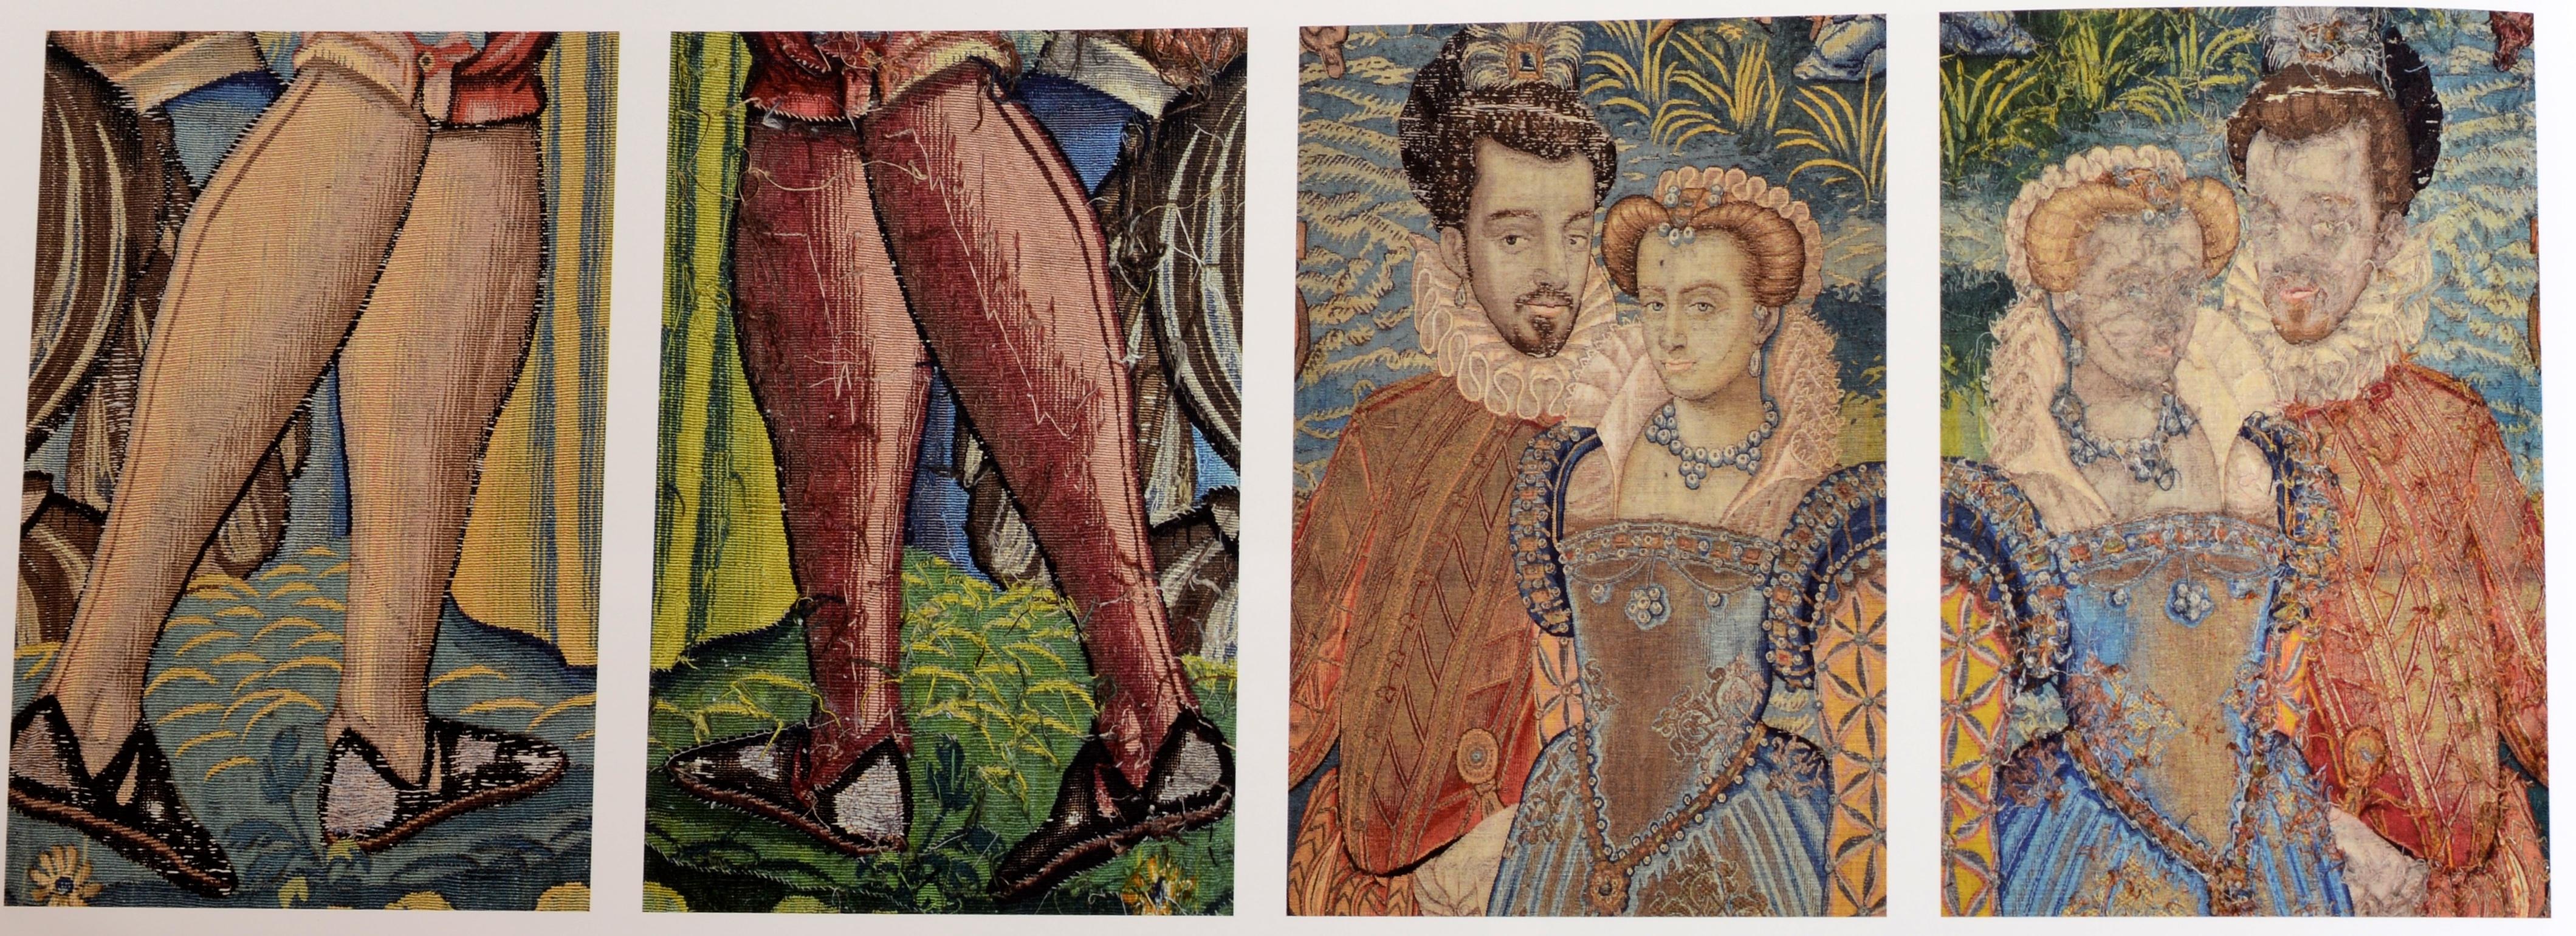 Renaissance Splendor Catherine de' Medici's Valois Tapestries 1st Ed In Excellent Condition For Sale In valatie, NY